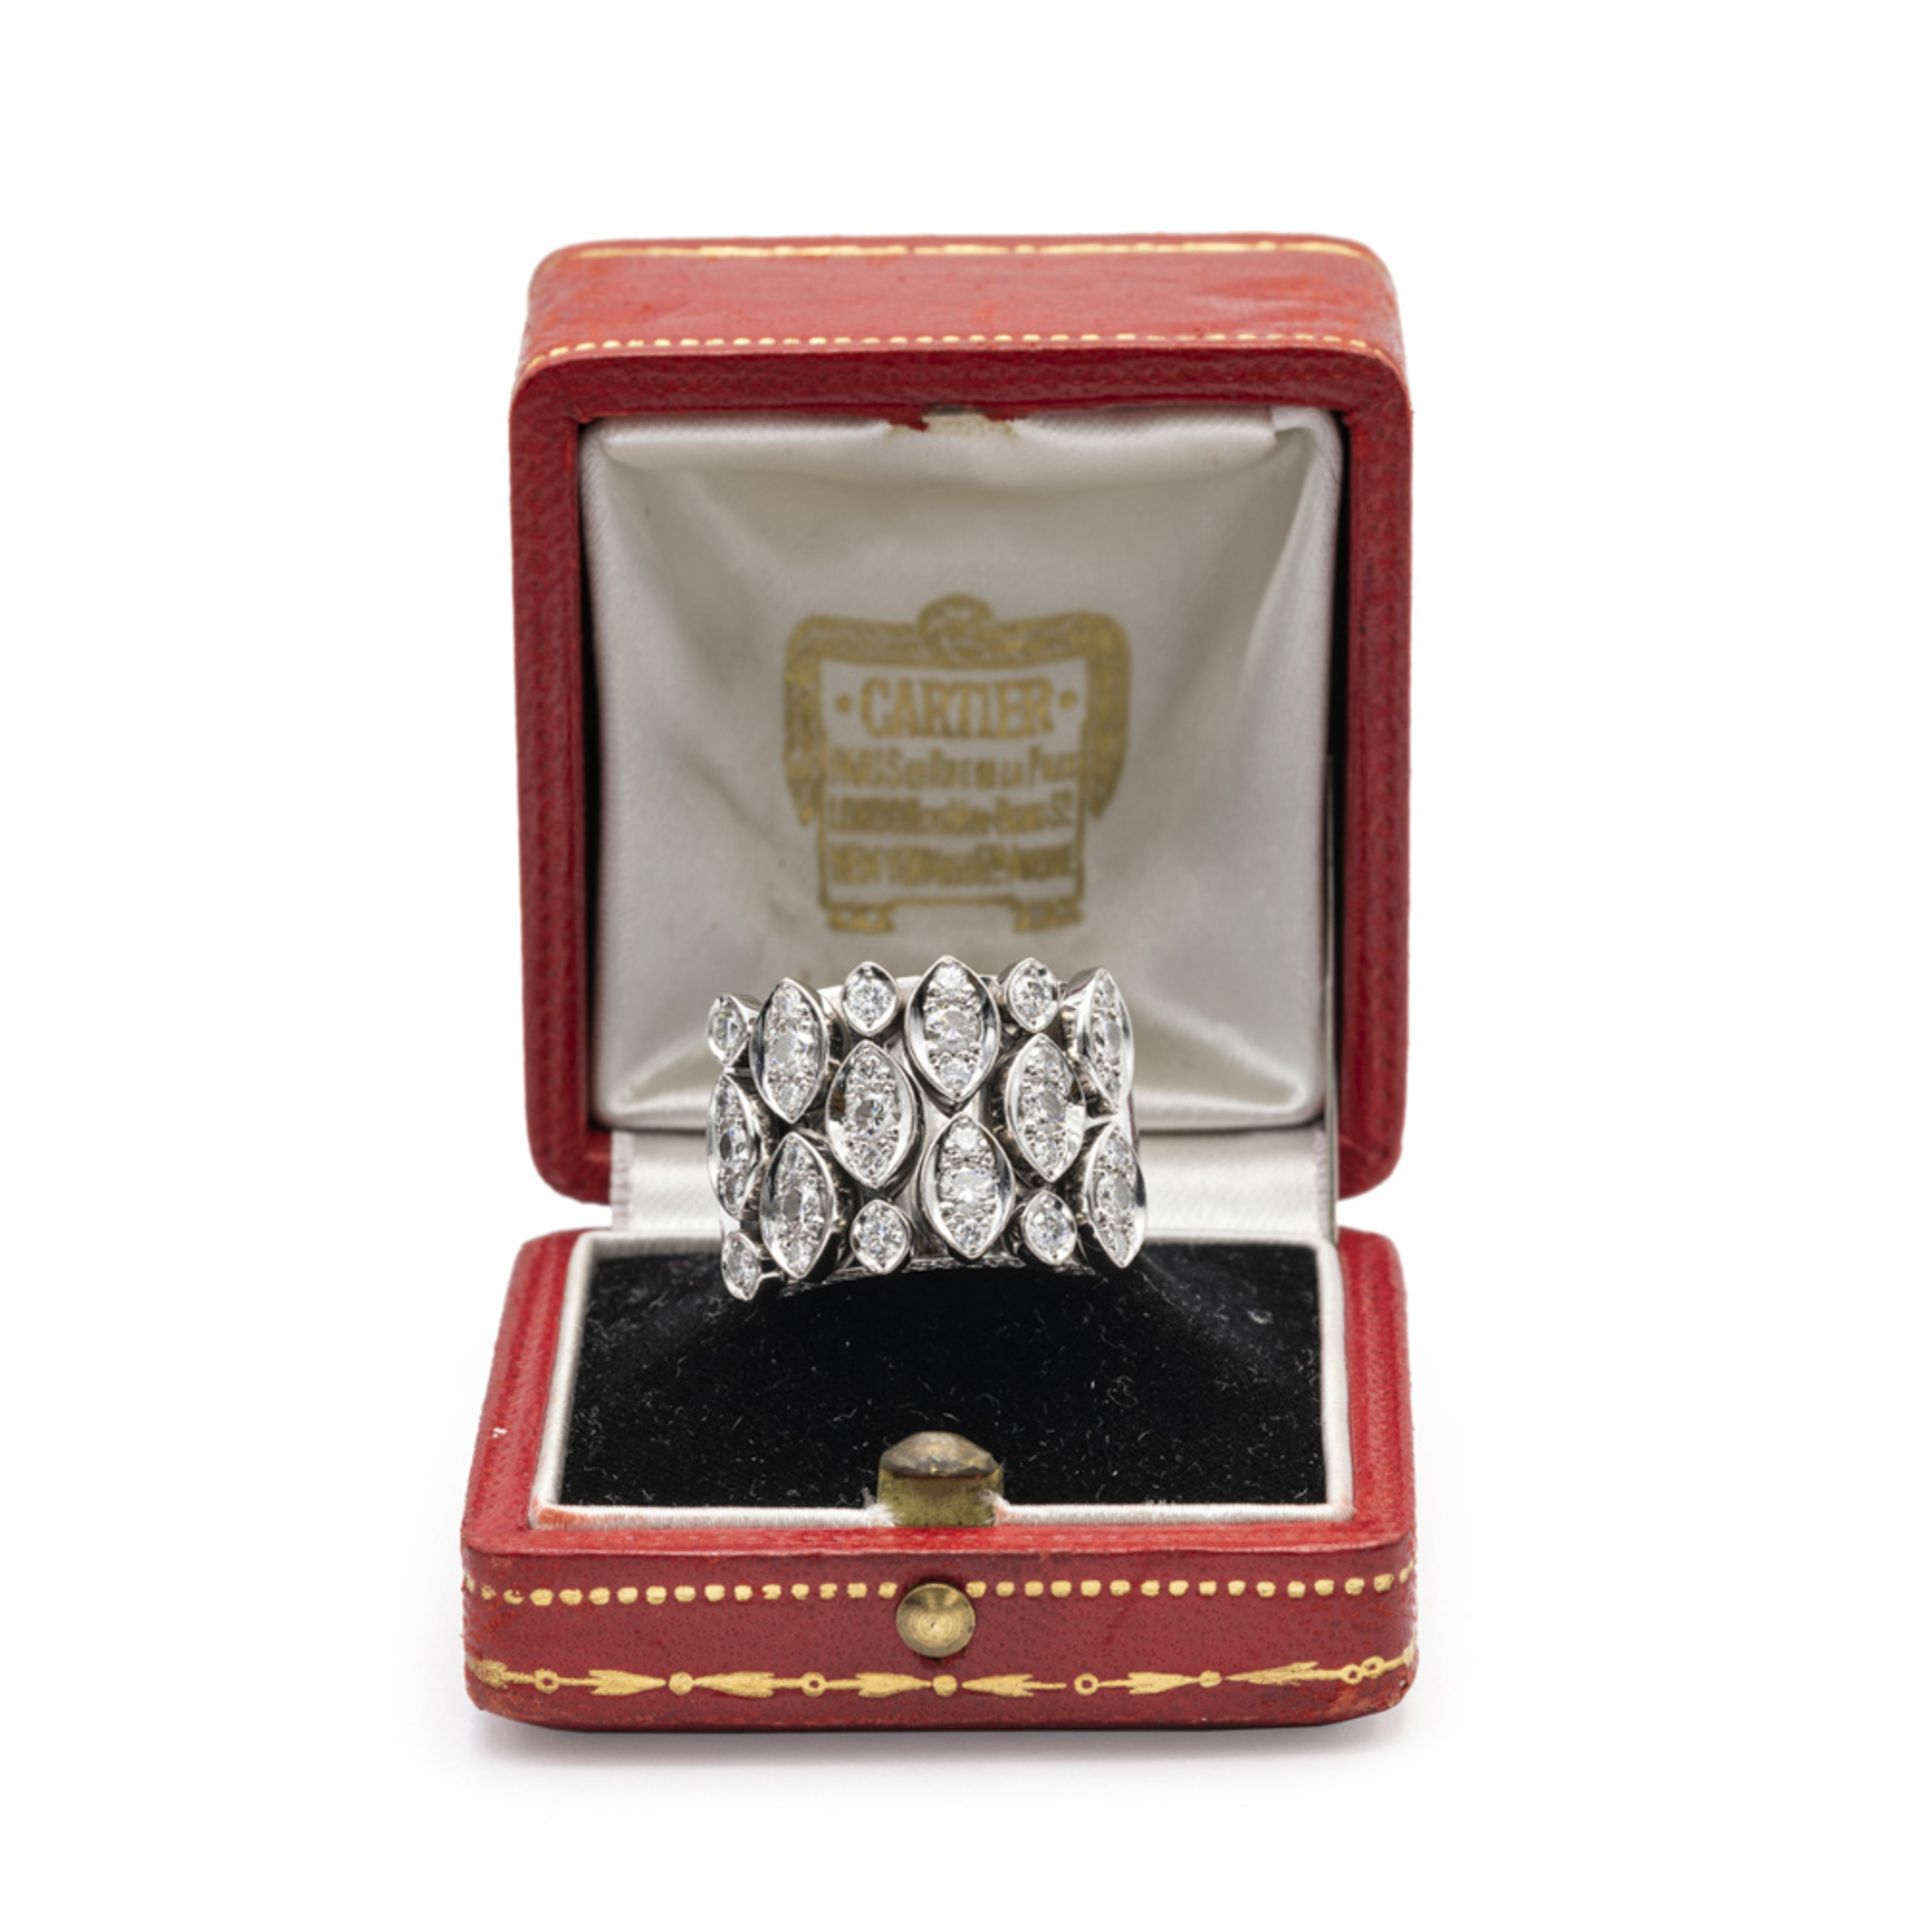 Cartier, 18kt white gold and diamonds en tremblant ring - Image 2 of 4